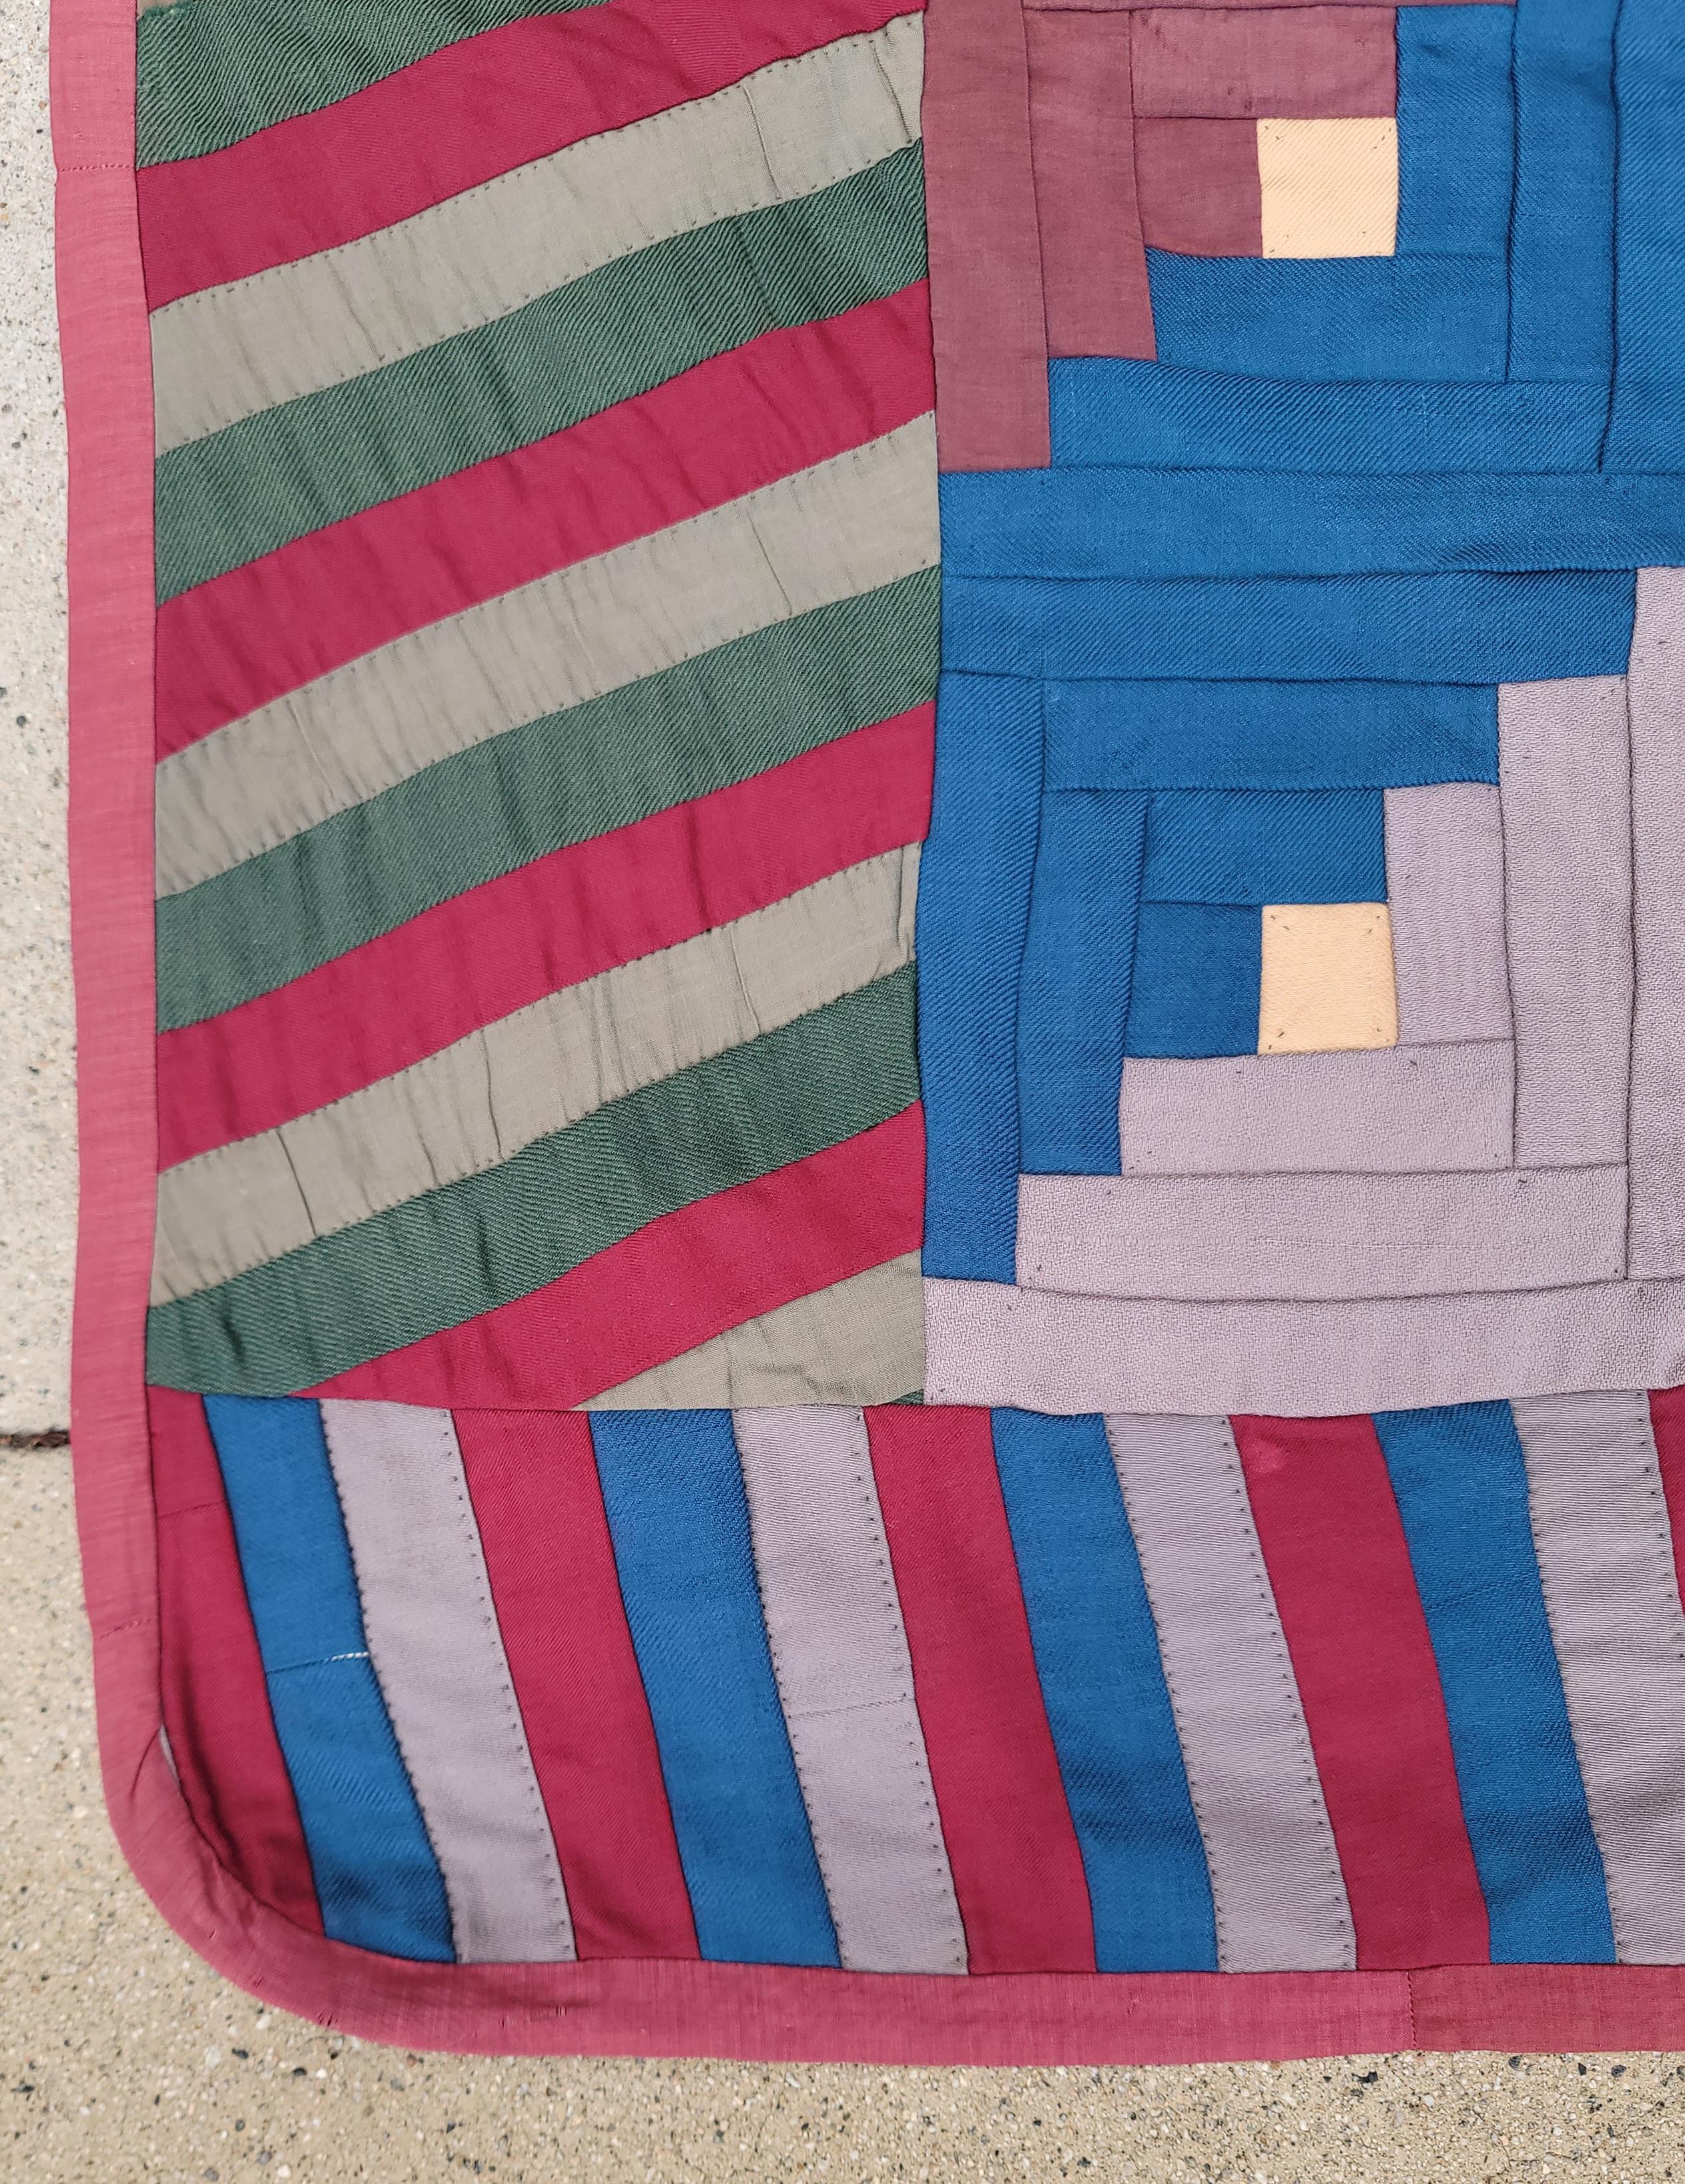 This amazing all wool chalis straight furlows pattern log cabin quilt from Lancaster County,Pennsylvania is in pristine condition.The striped border is a fantastic finish to complete the quilt pattern.